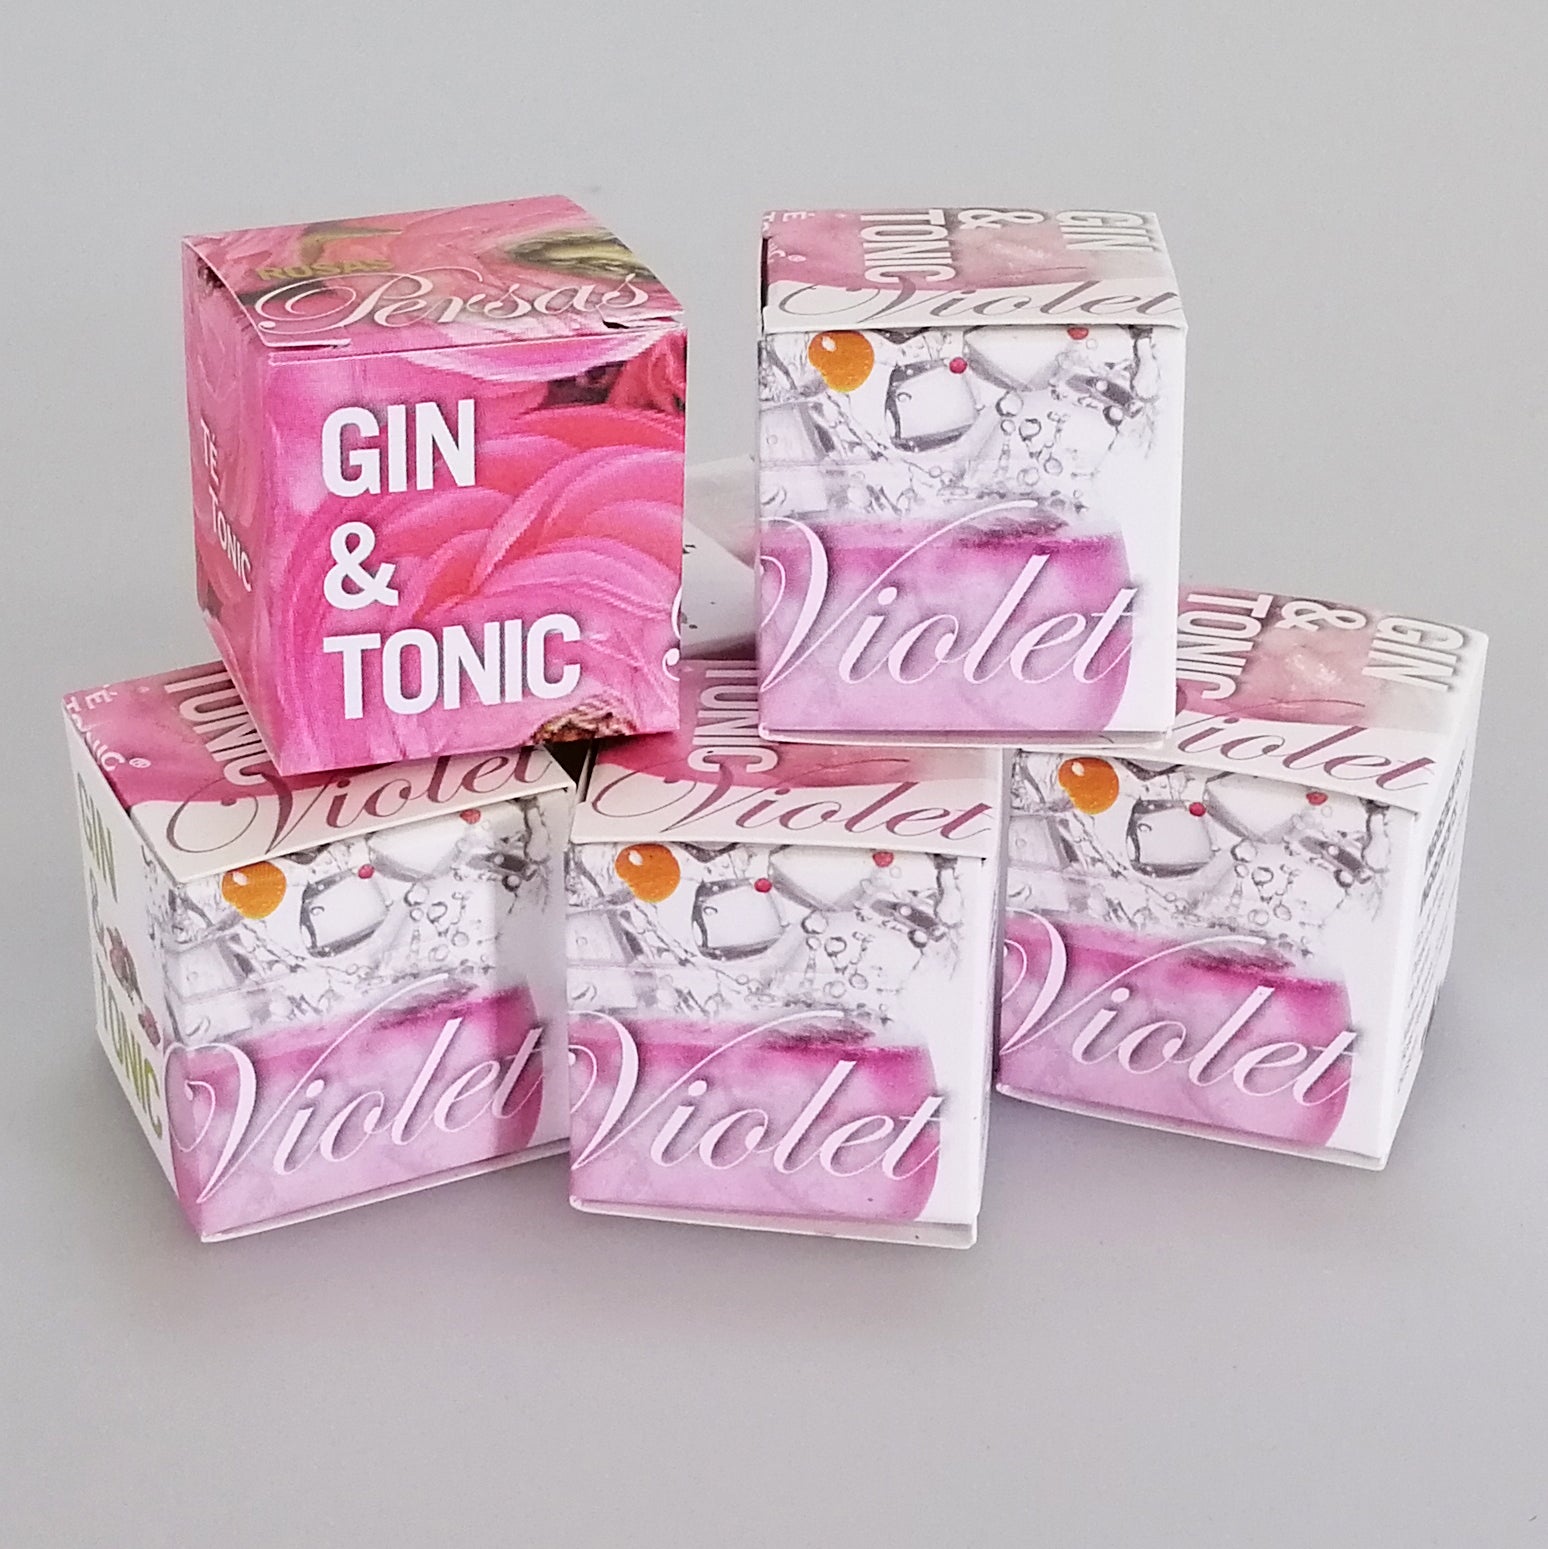 Gin & Tonic Violet Infusion Pack - 5 Infusions